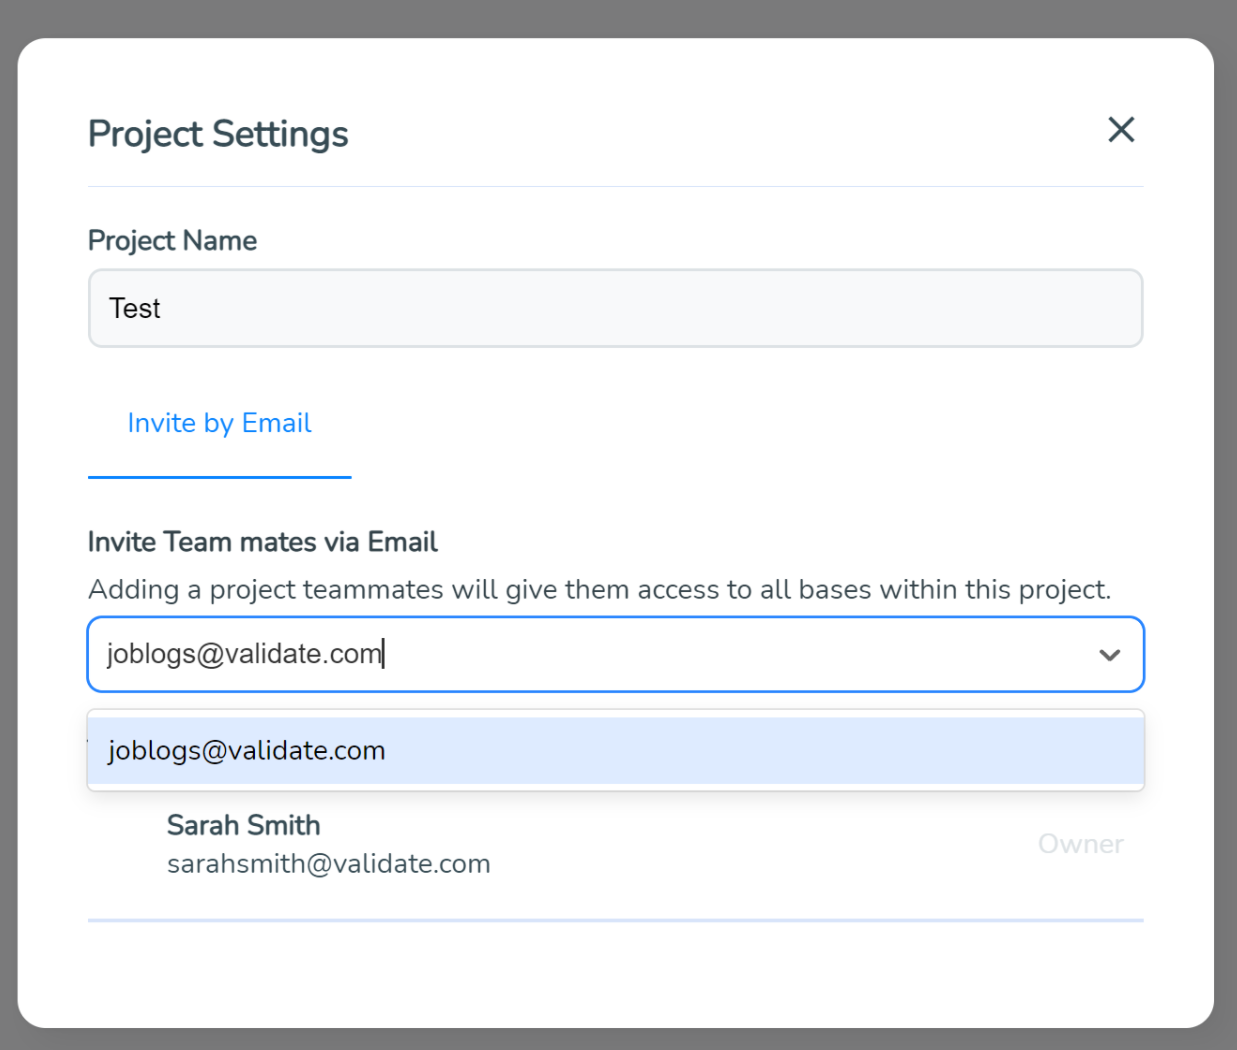 Enter your team members email address to set up your team in SimVenture Validate.